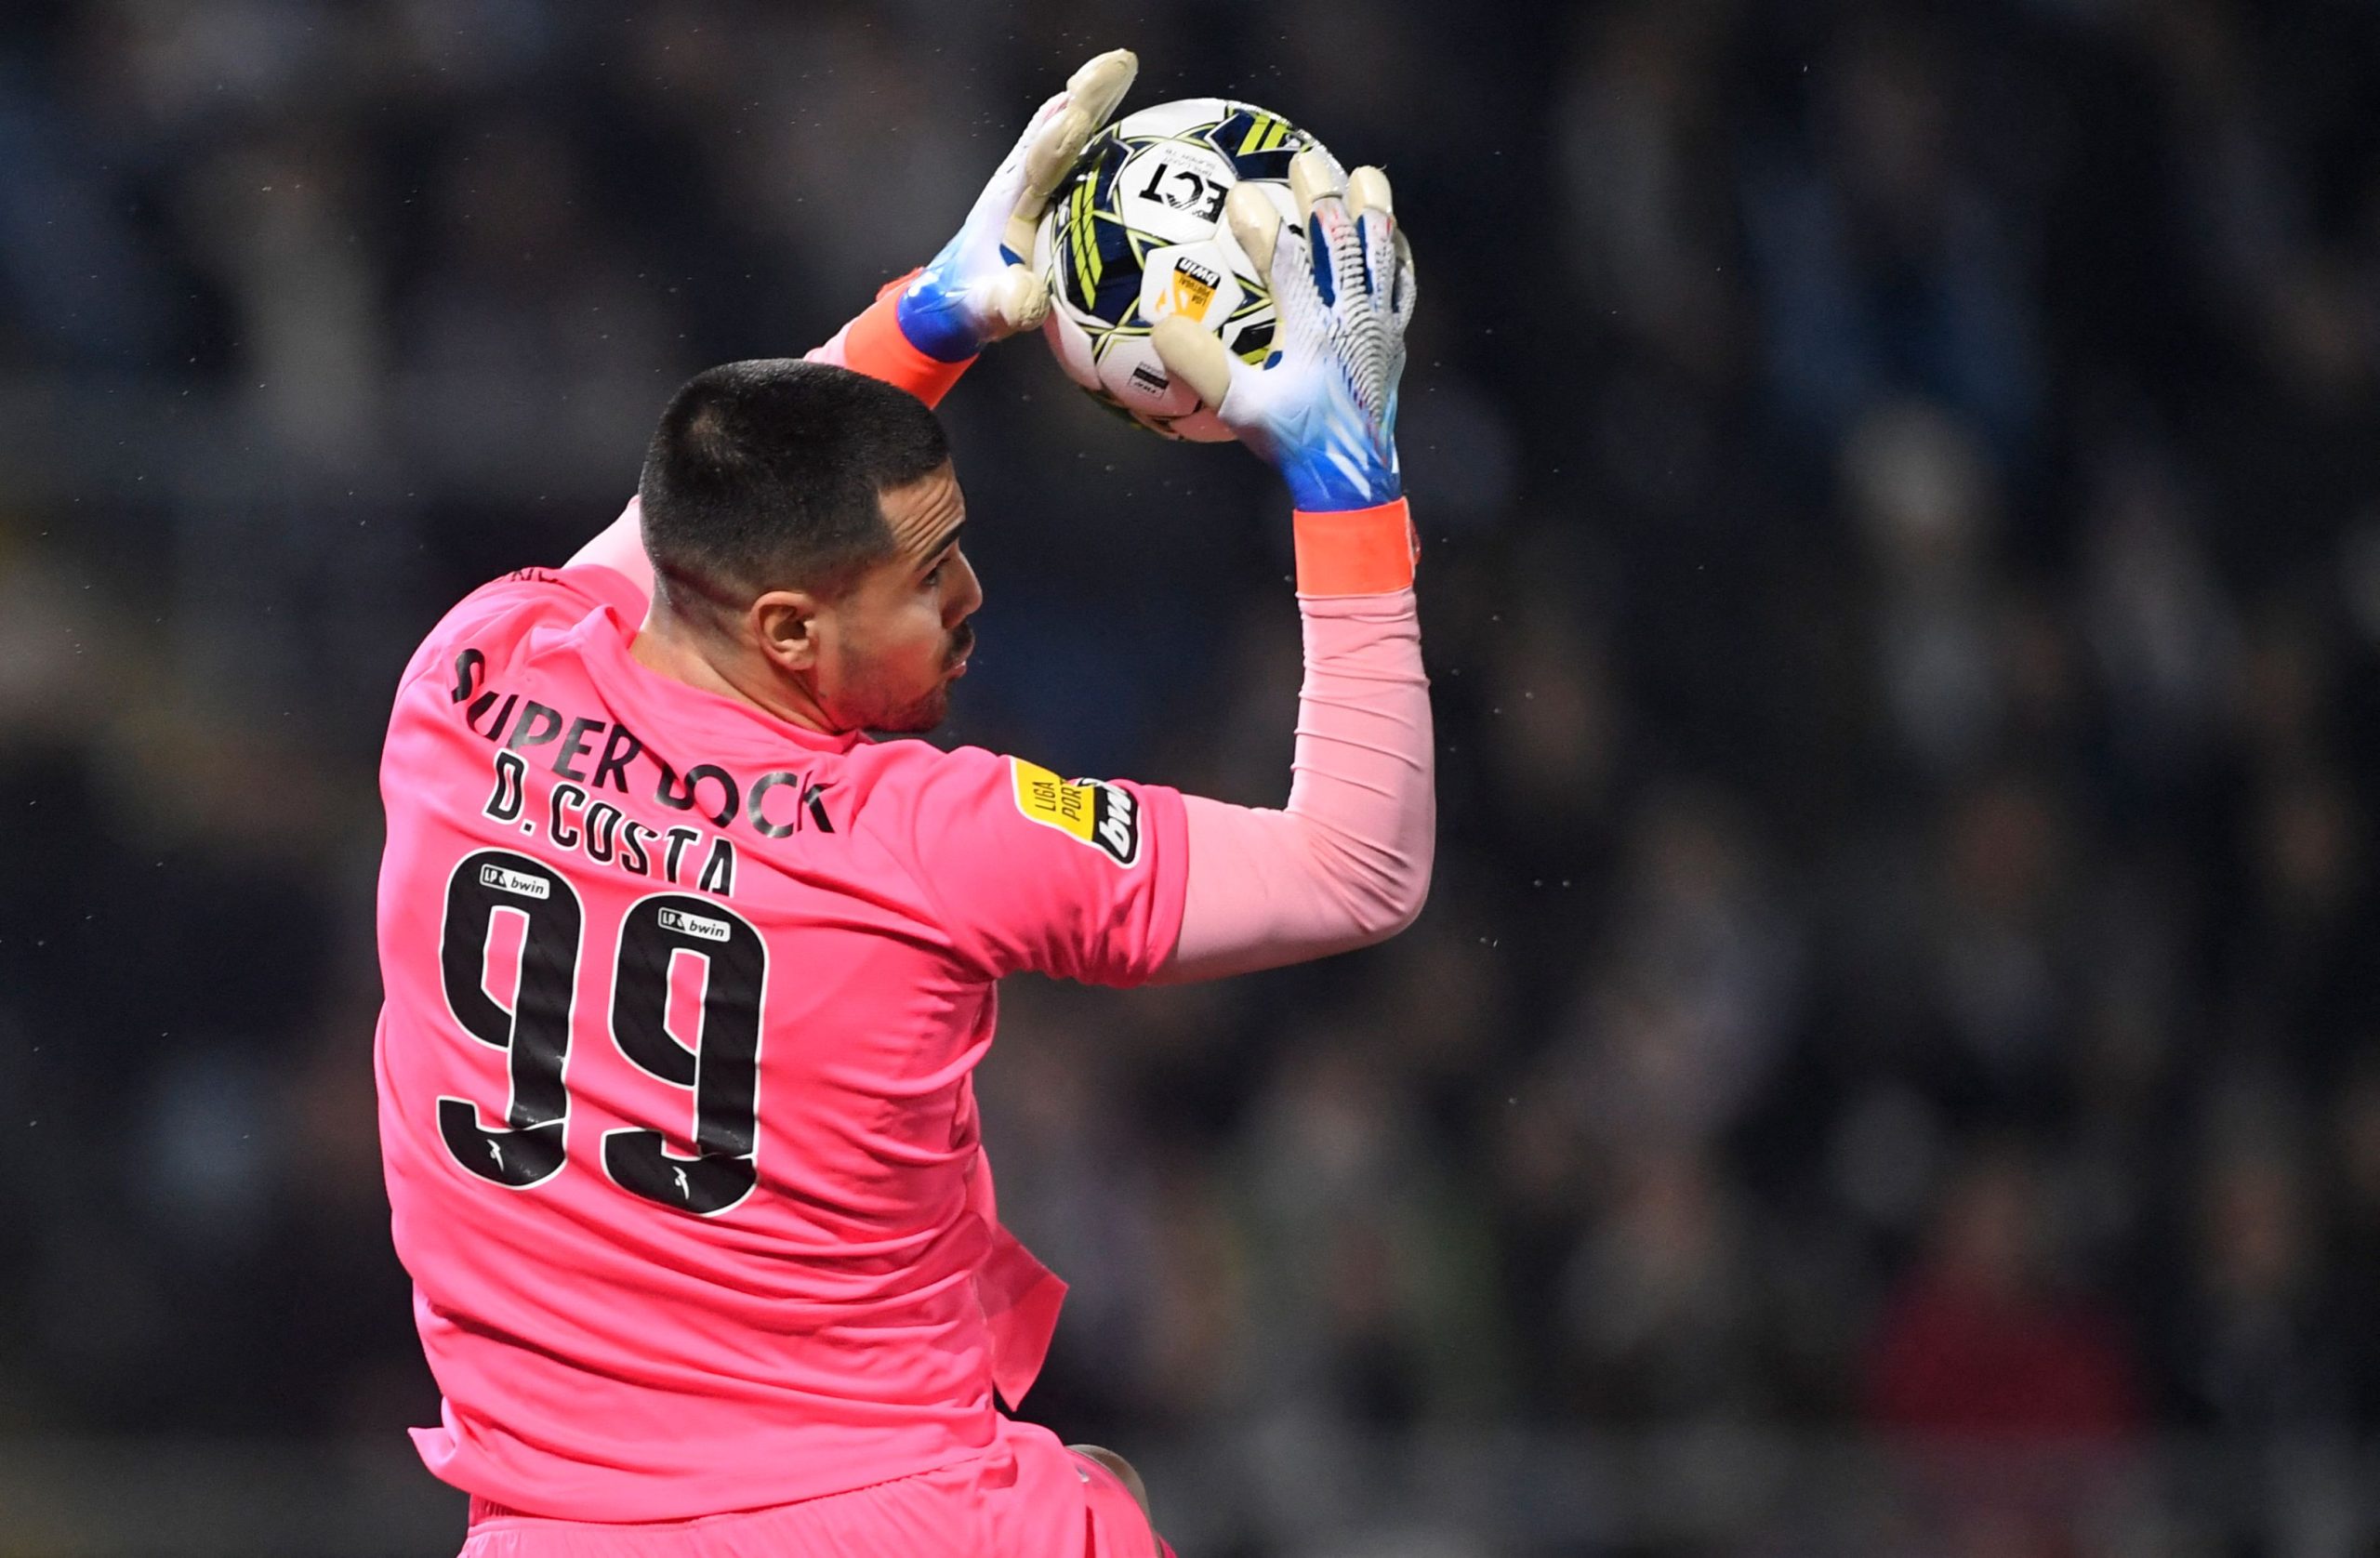 FC Porto's Portuguese goalkeeper Diogo Costa catches the ball during the Portuguese league football match between Vitoria Guimaraes SC and FC Porto at the Dom Afonso Henriques stadium in Guimaraes on January 21, 2023.